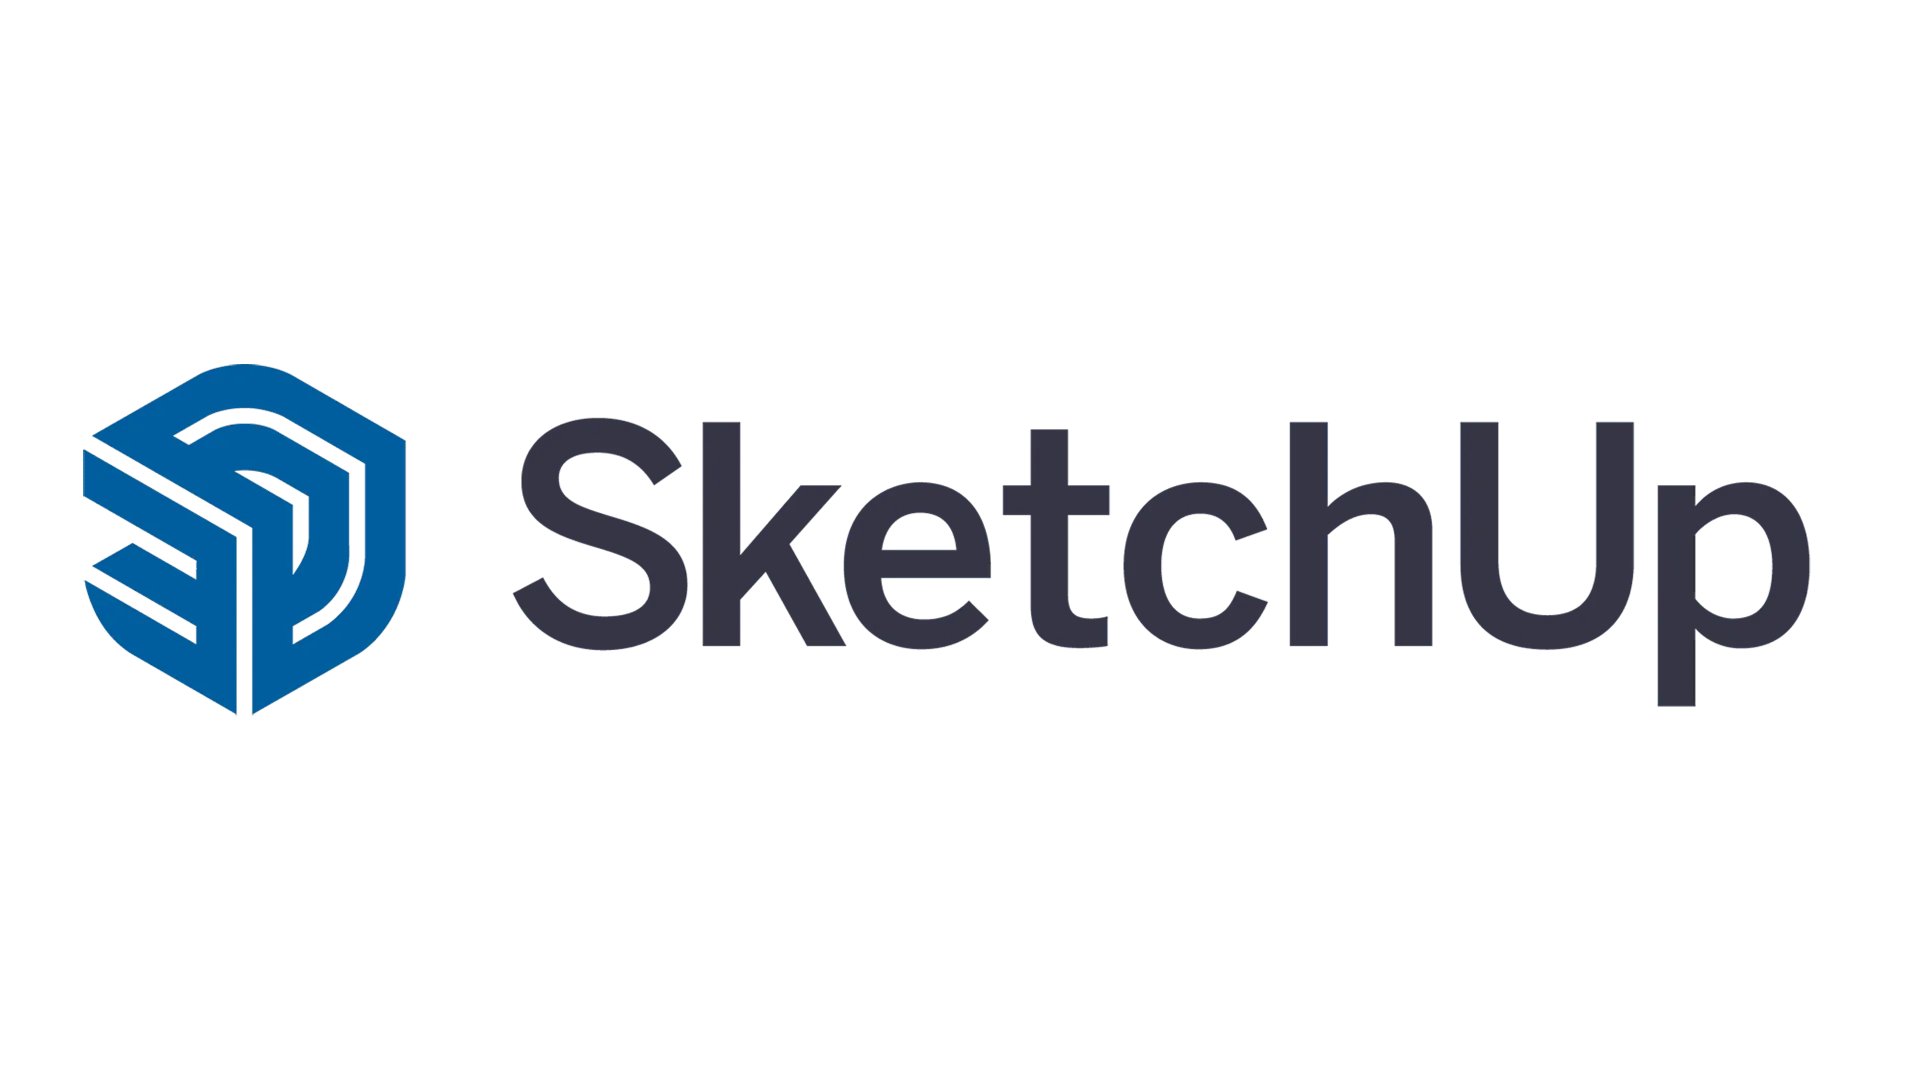 Logo of SketchUp, a 3D modeling software application used in event production and services.